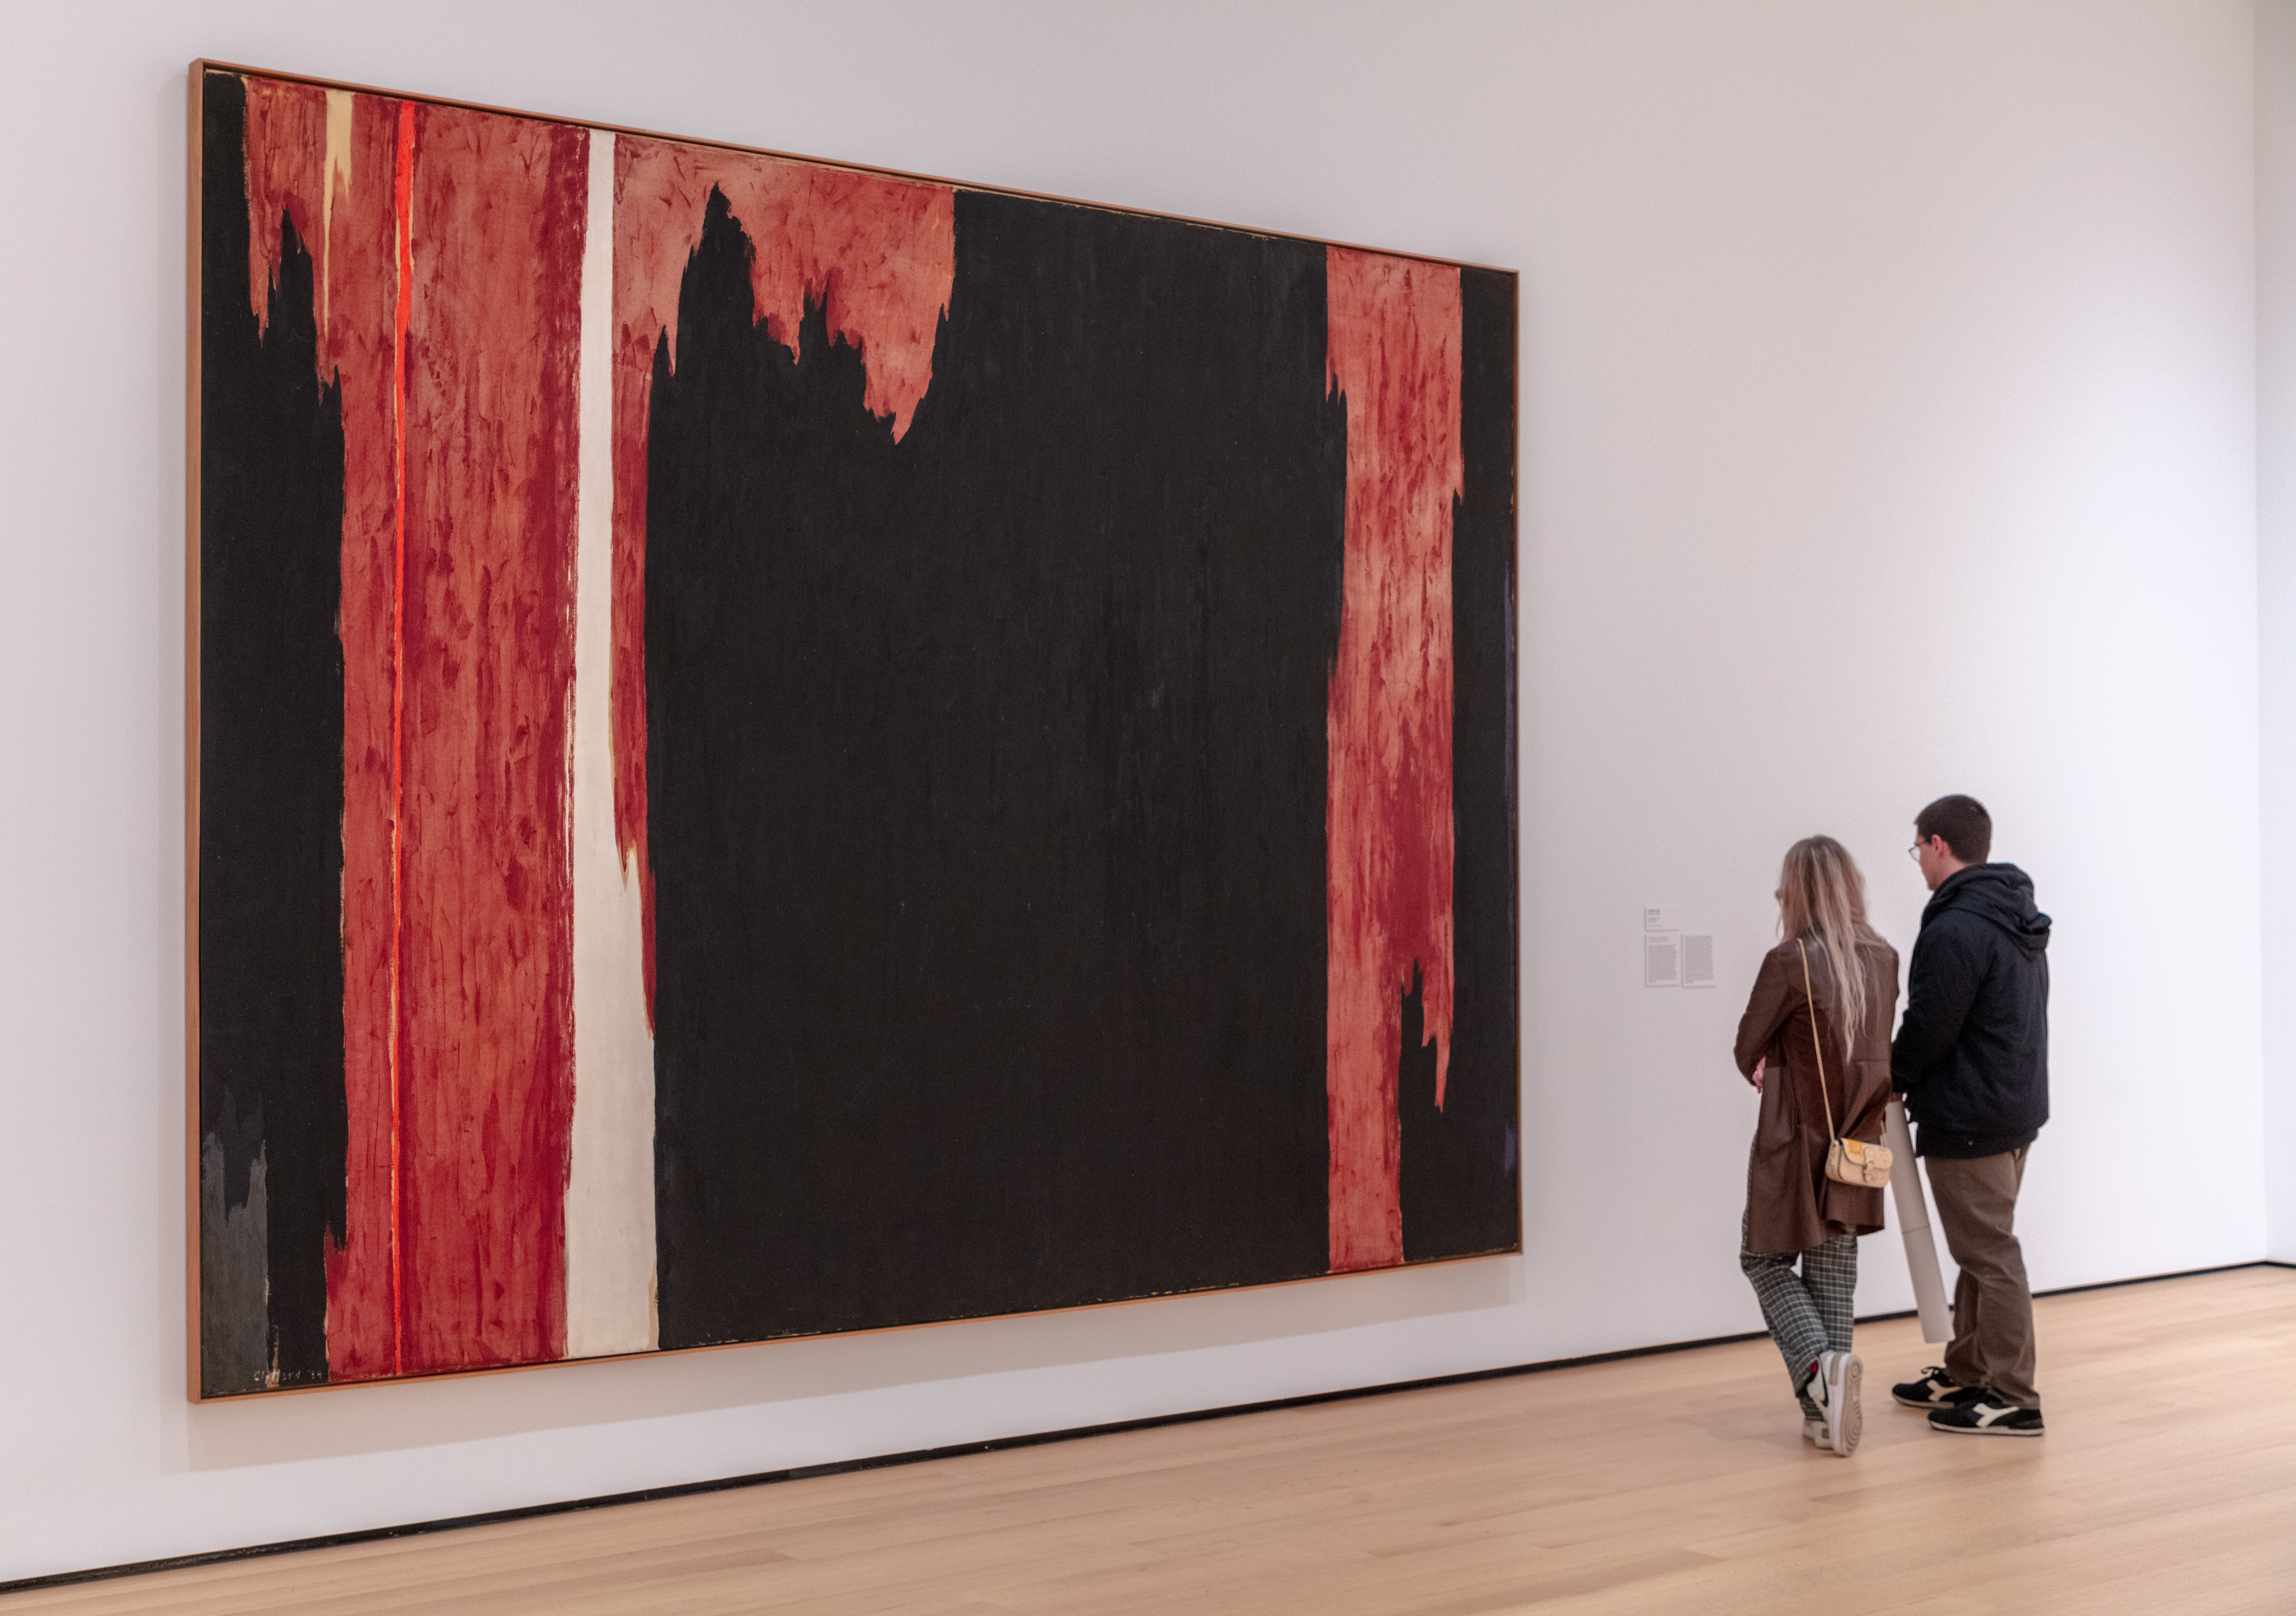 A man and woman standing in front of a large abstract painting that consists of shades of red, white, and black